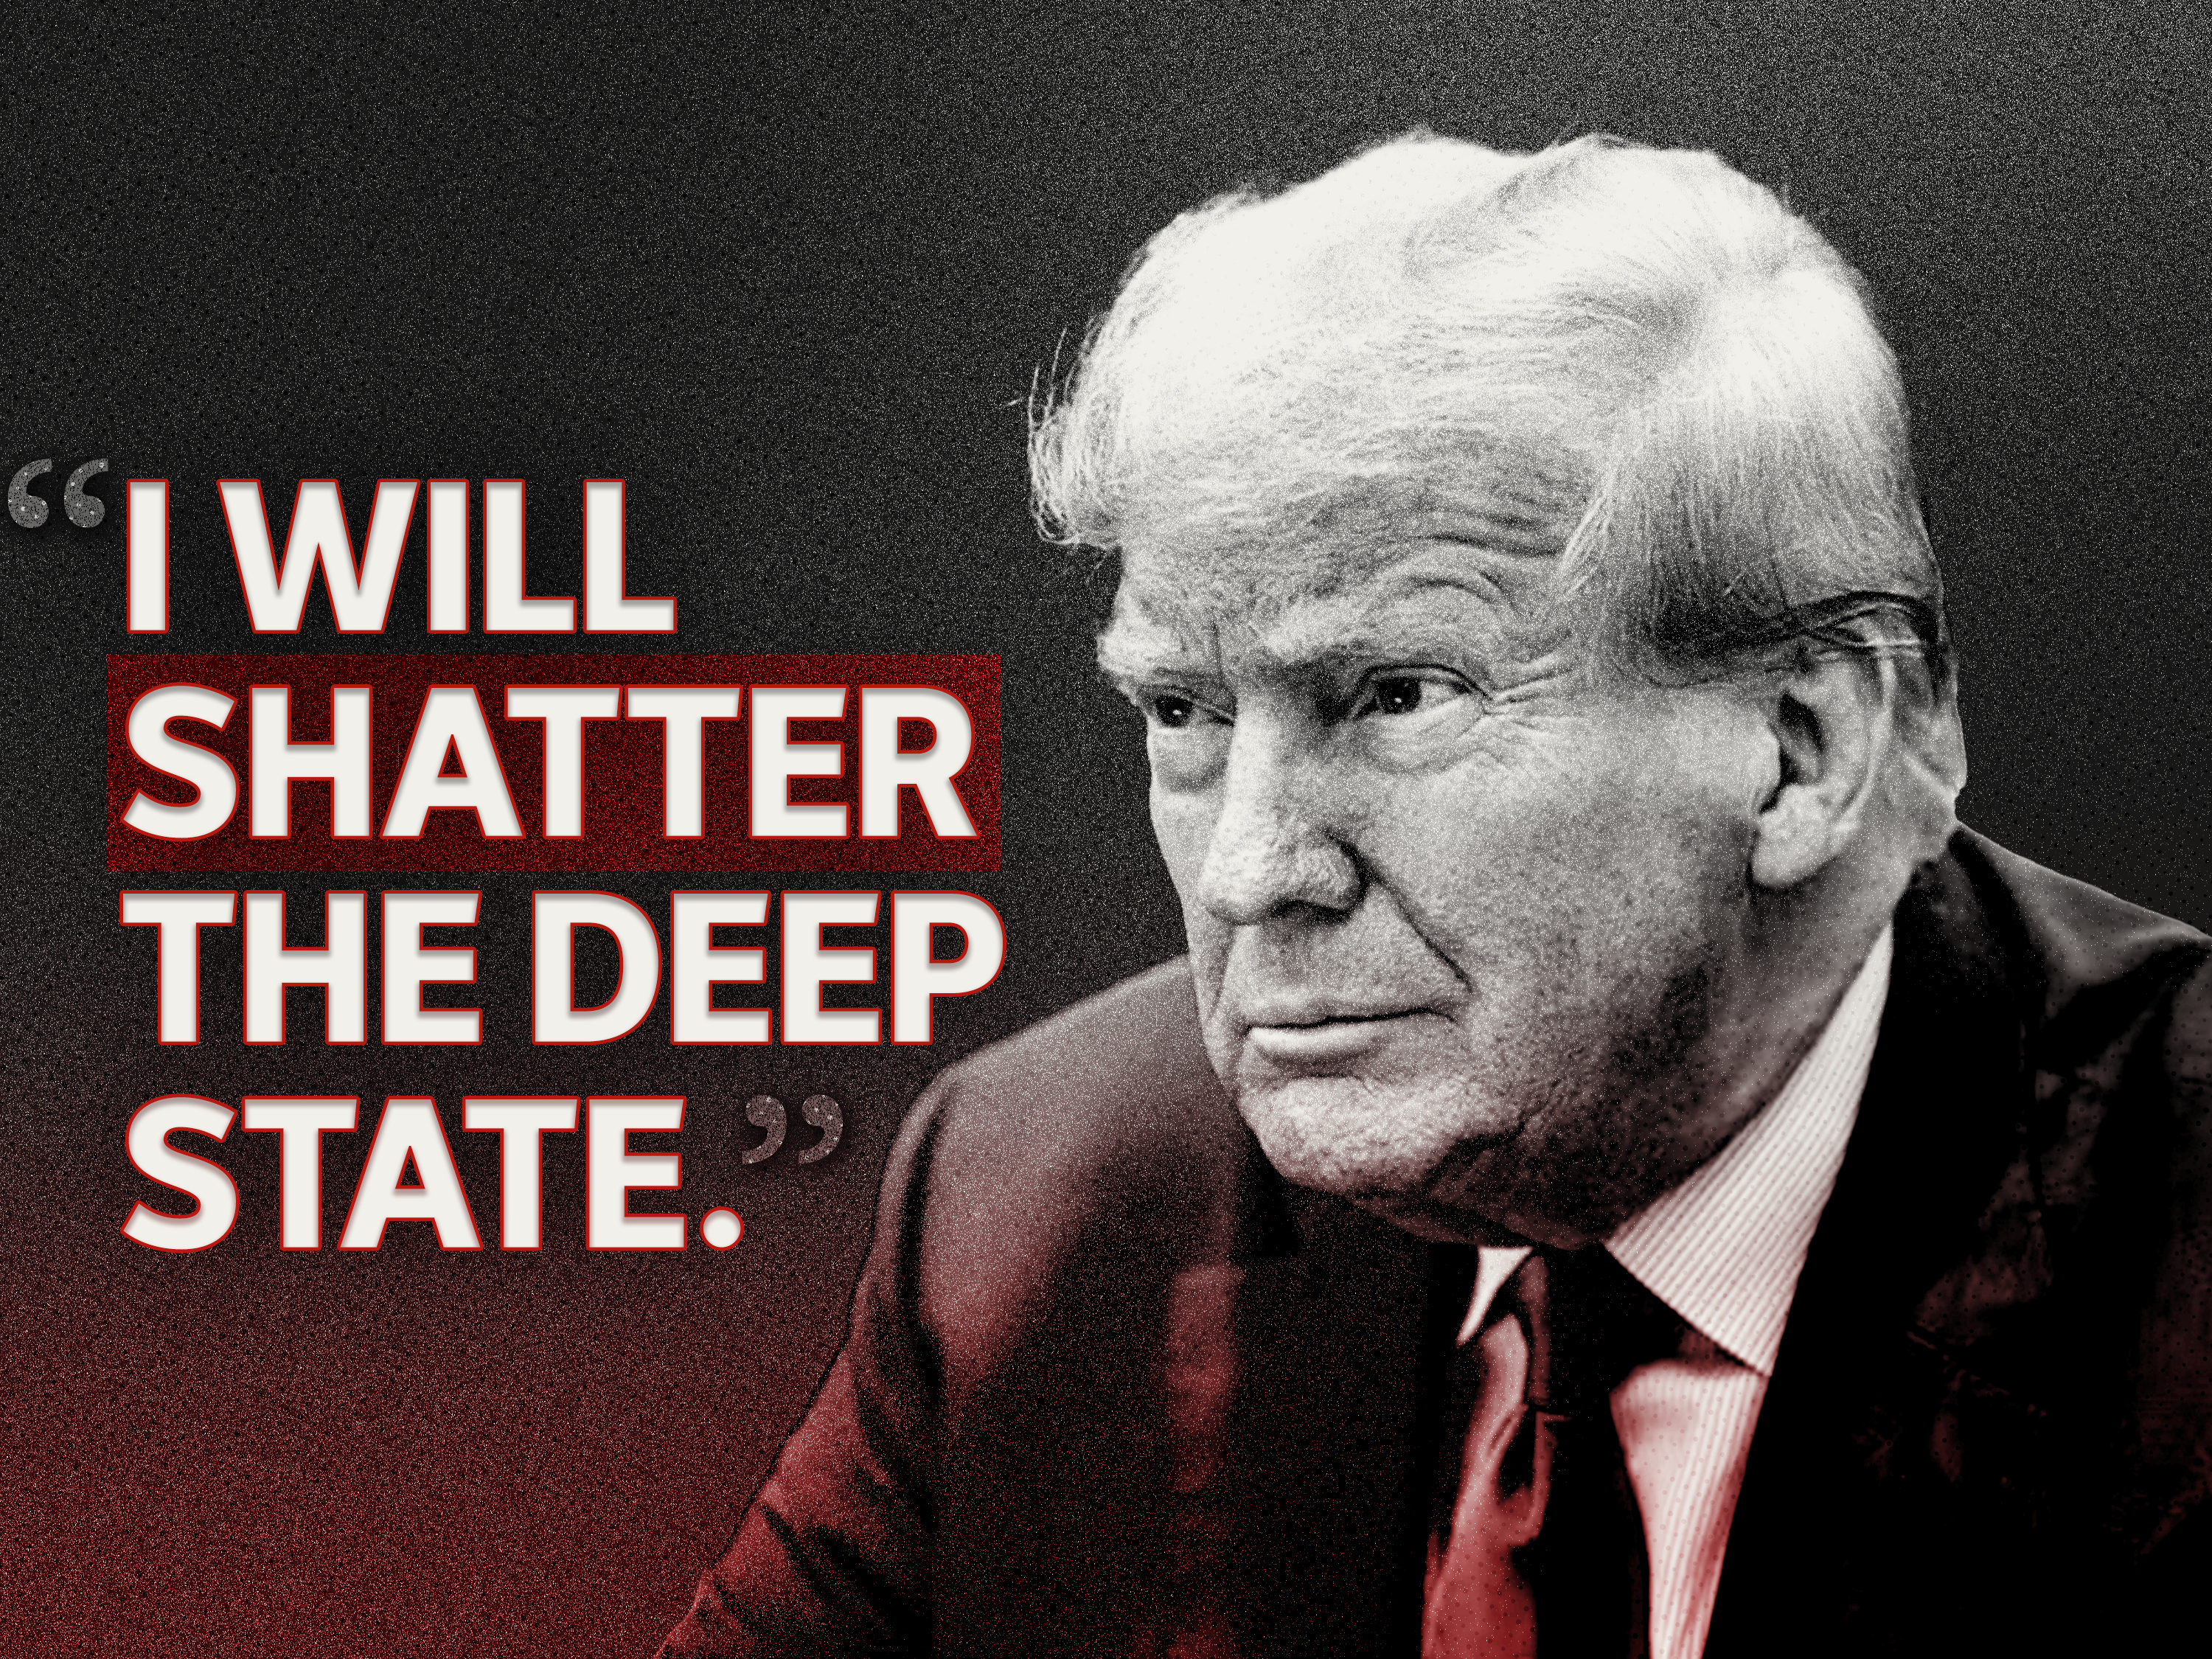 A headshot of Donald Trump next to the words 'I will shatter the deep state'.